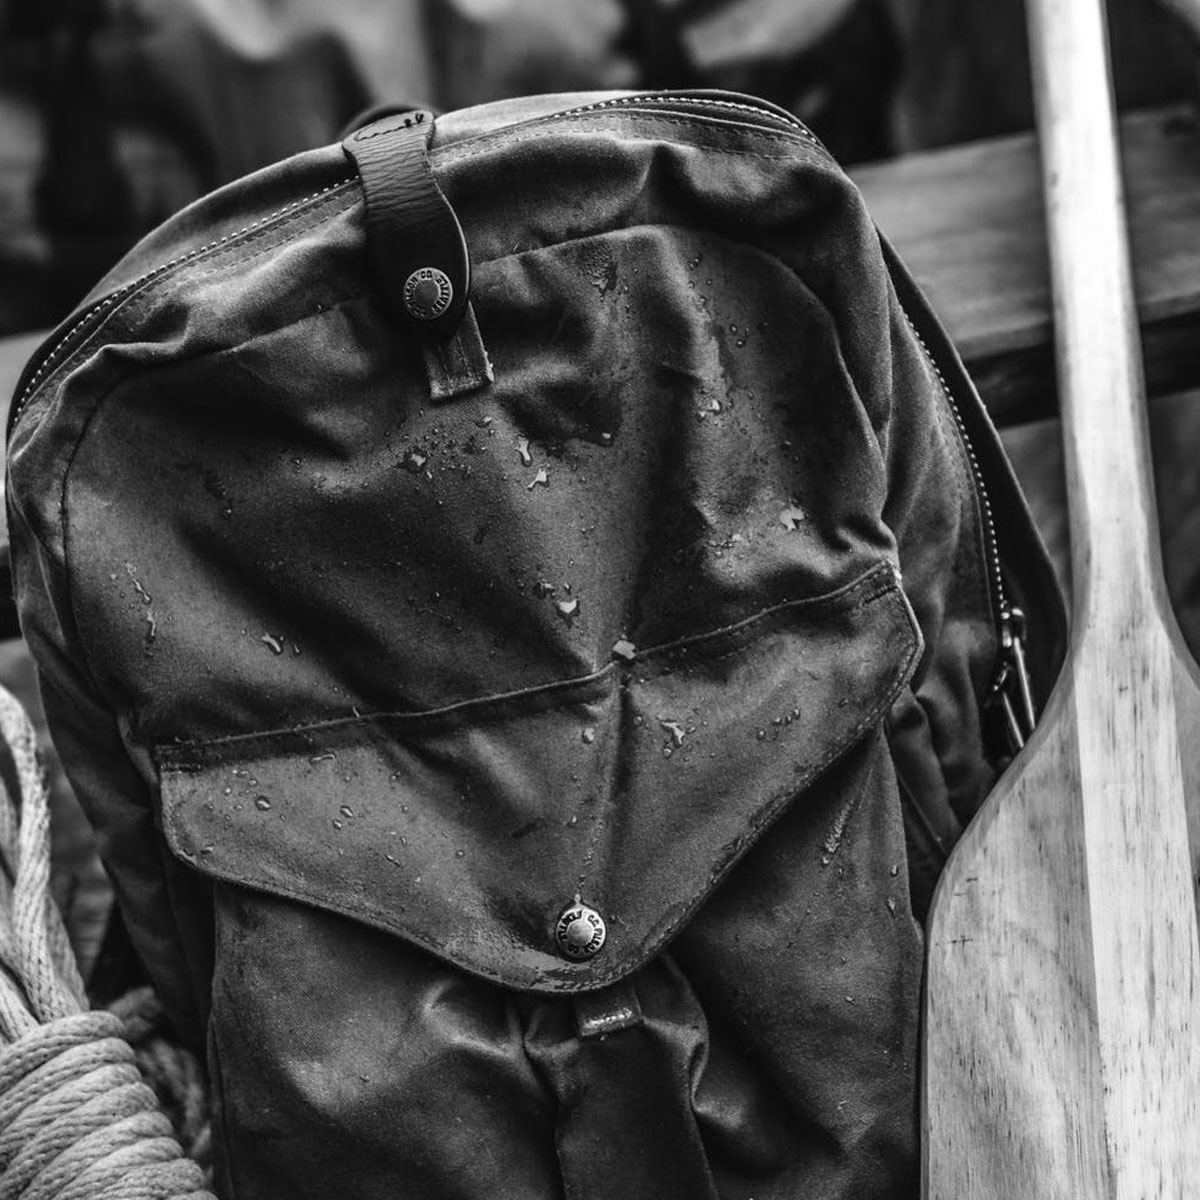 Filson Journeyman Backpack Dark Tan/Flame, great for hiking and for hauling stuff around town